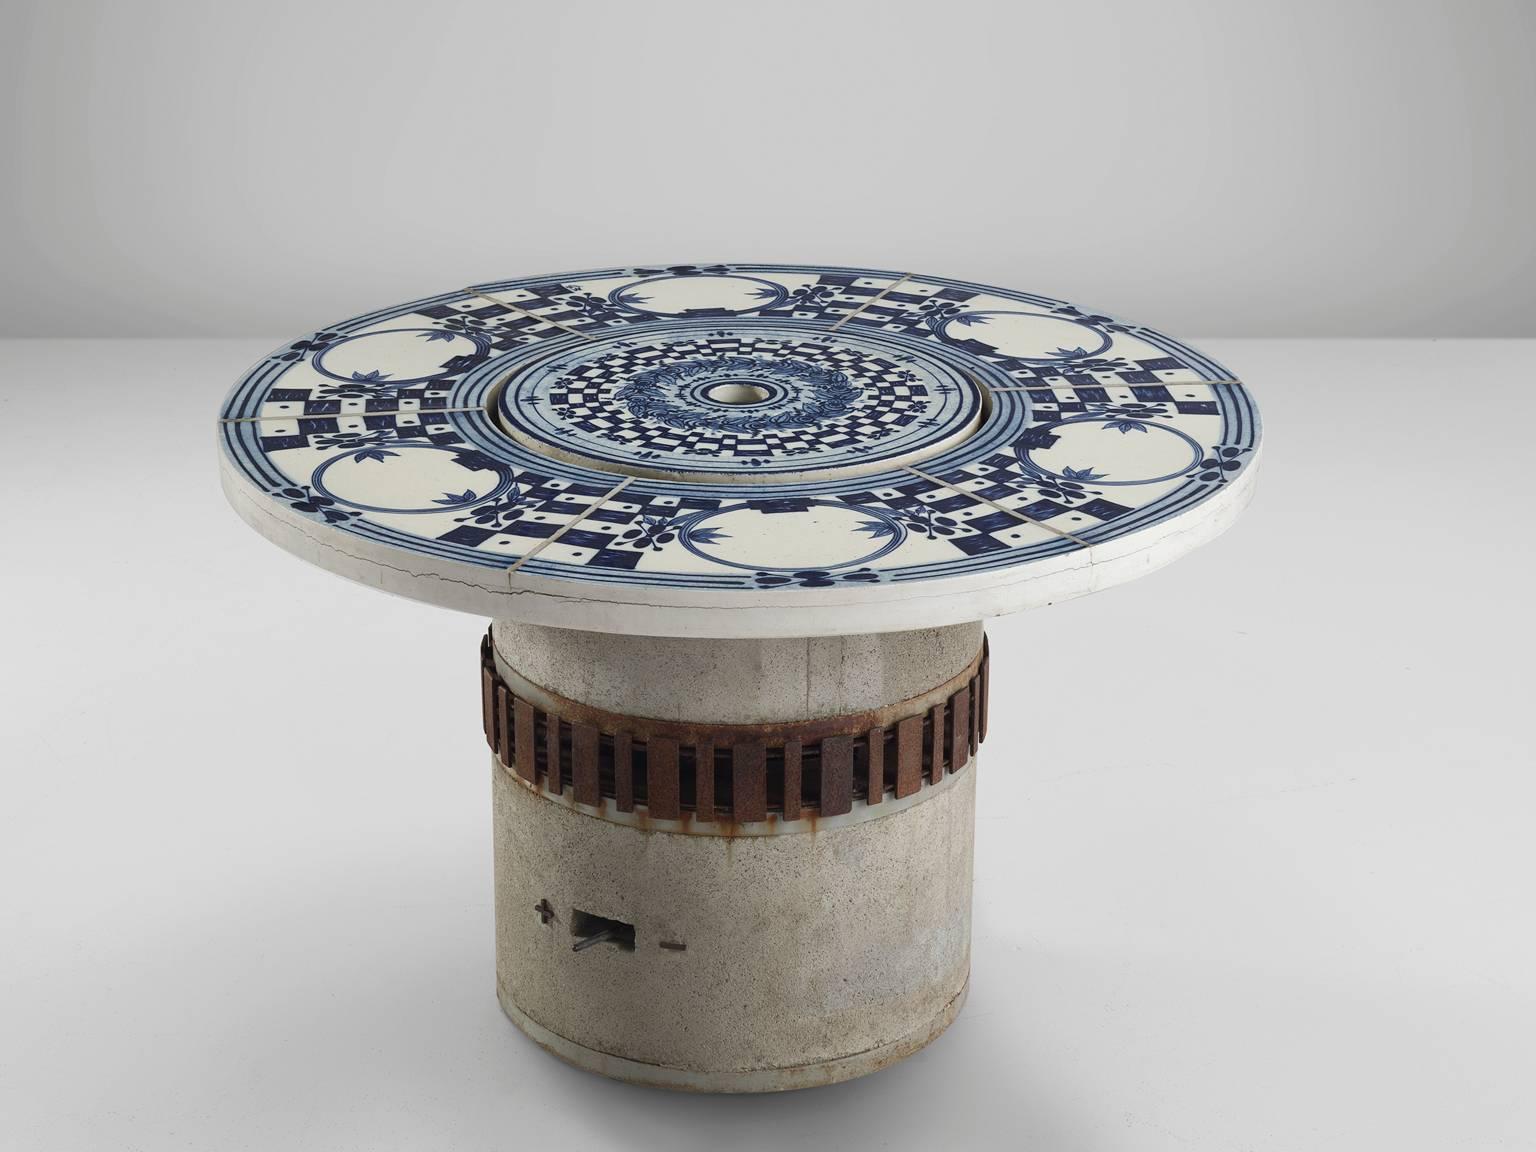 Bjørn Wiinblad, 'Hibachi' grill table, faience tiles and glazed concrete, metal, Denmark / Germany, 1970s.

This garden table is decorated with hand-painted ceramic tiles in blue and white. The centre features removable centre beneath which is the